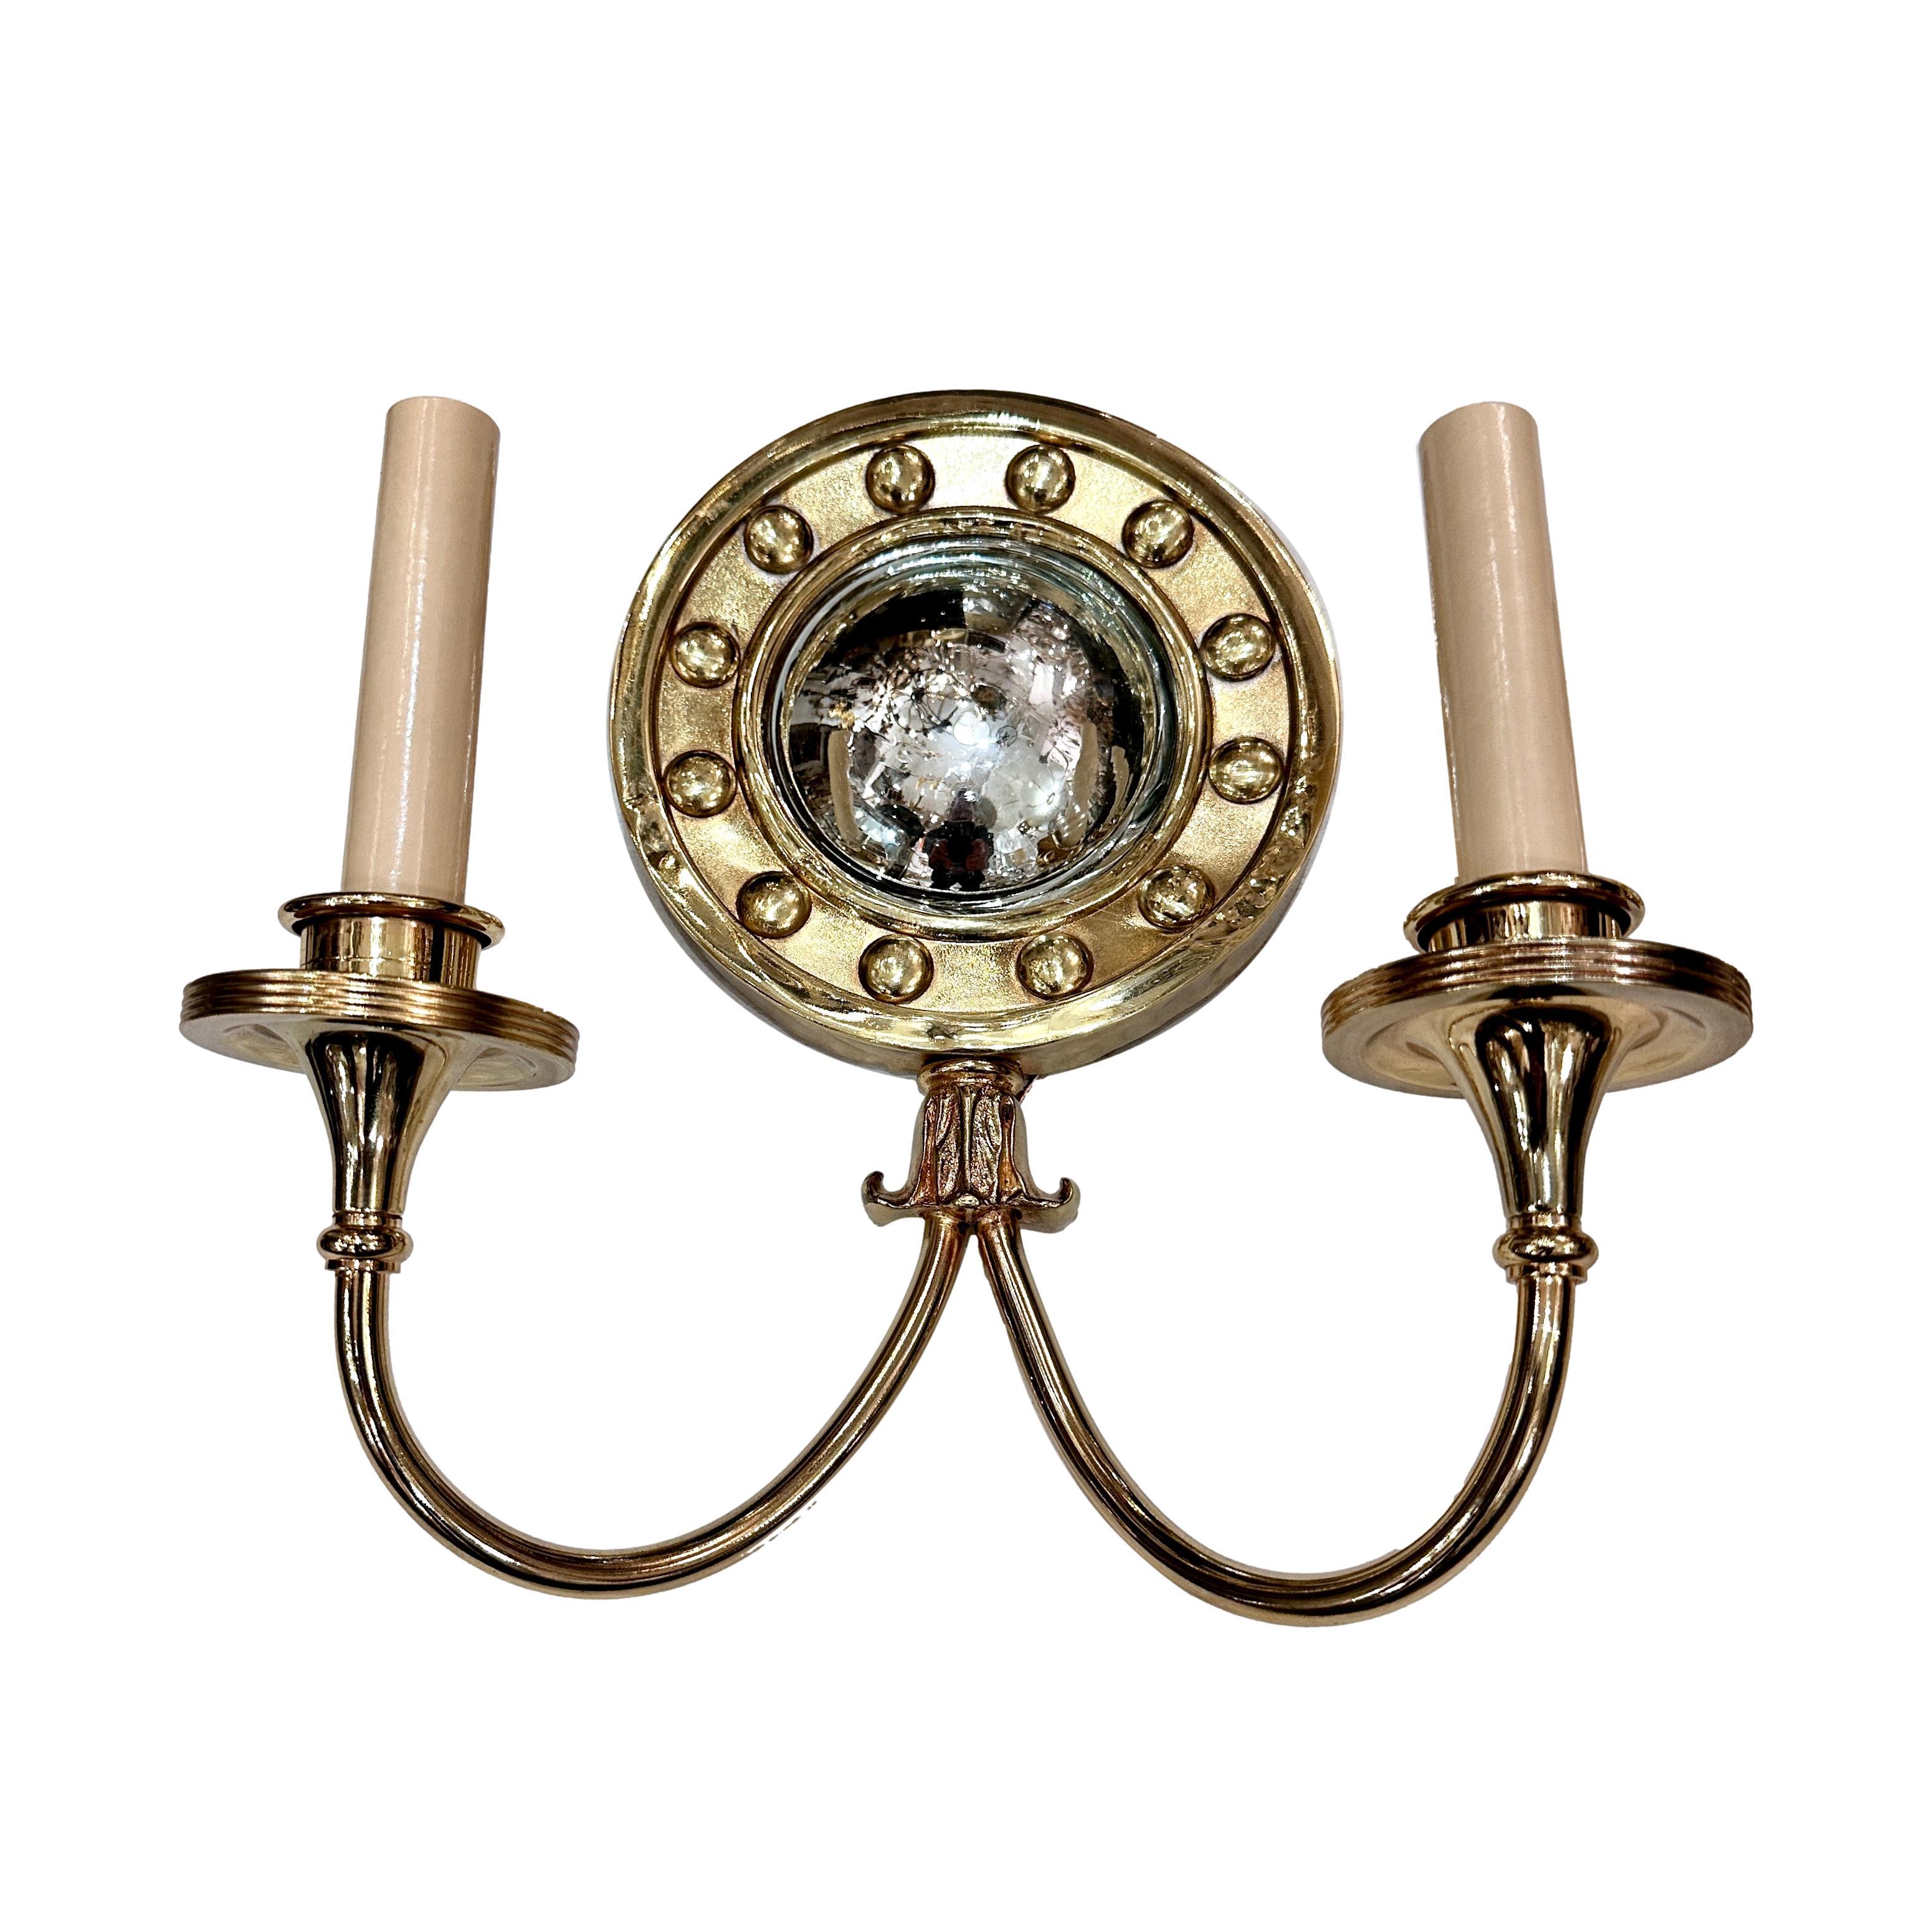 A set of of ten English circa 1960's polished brass sconces with mirror insets. Sold per pair.

Measurements:
Height: 12